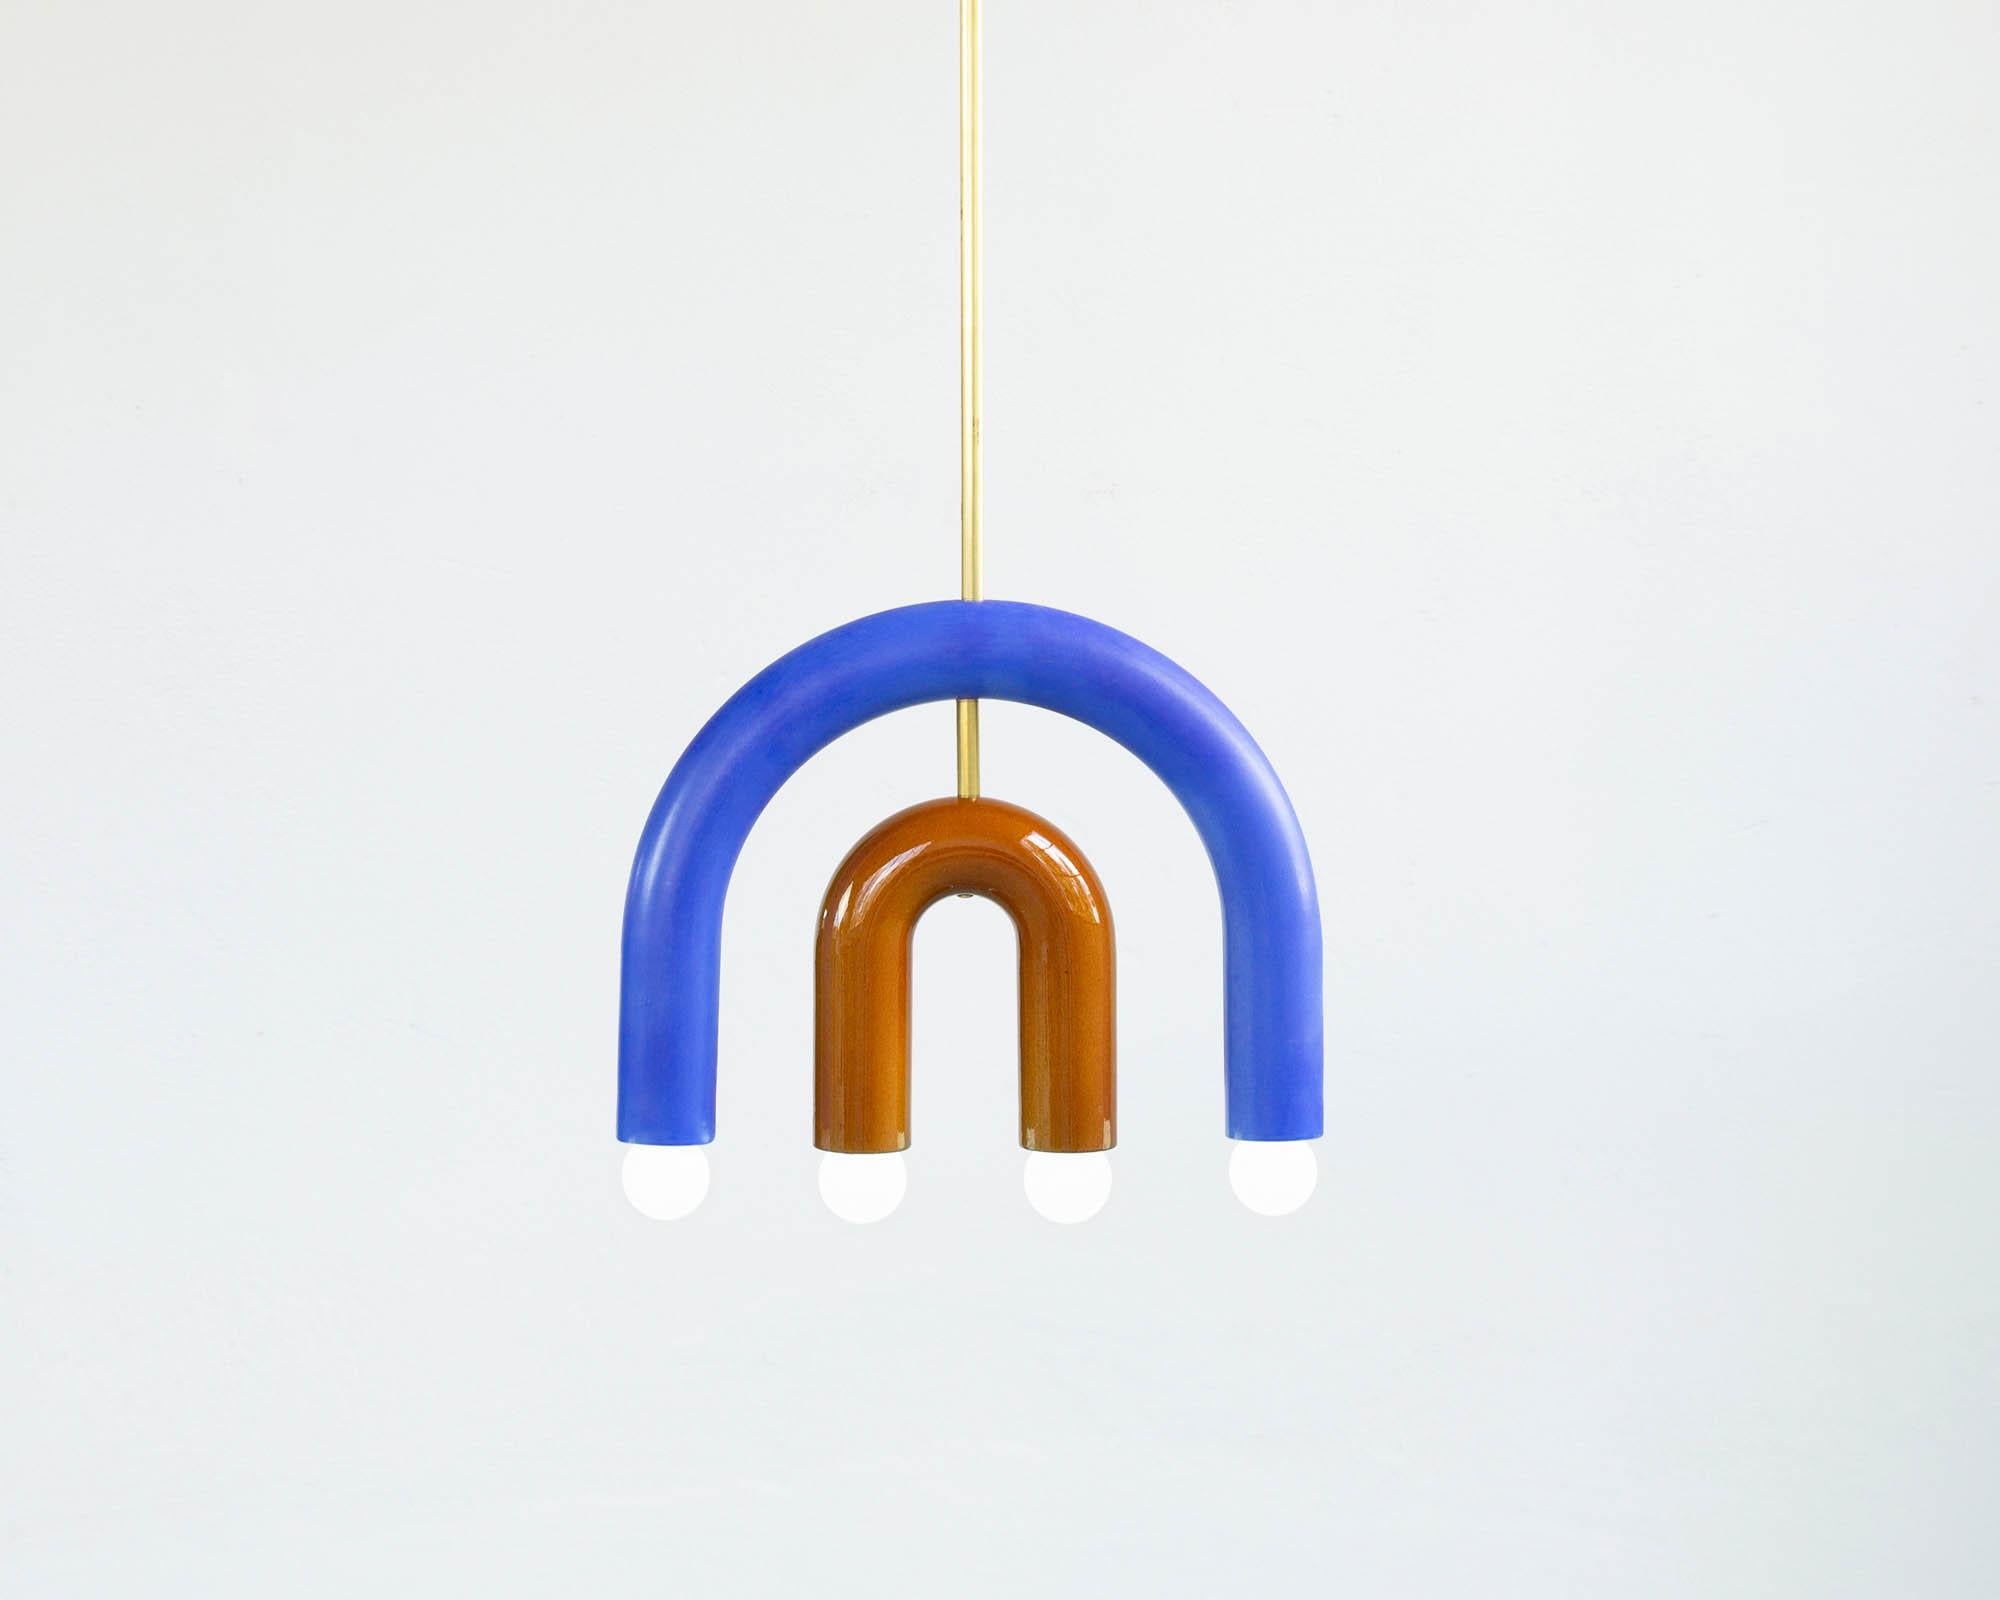 TRN C1 Pendant lamp / ceiling lamp / chandelier 
Designer: Pani Jurek

Dimensions: H. 27.5 x 35 x 5 cm
Model shown: Cobalt blue & ochre

Bulb (not included): E27/E26, compatible with US electric system

Materials: Hand glazed ceramic and brass
Rod: